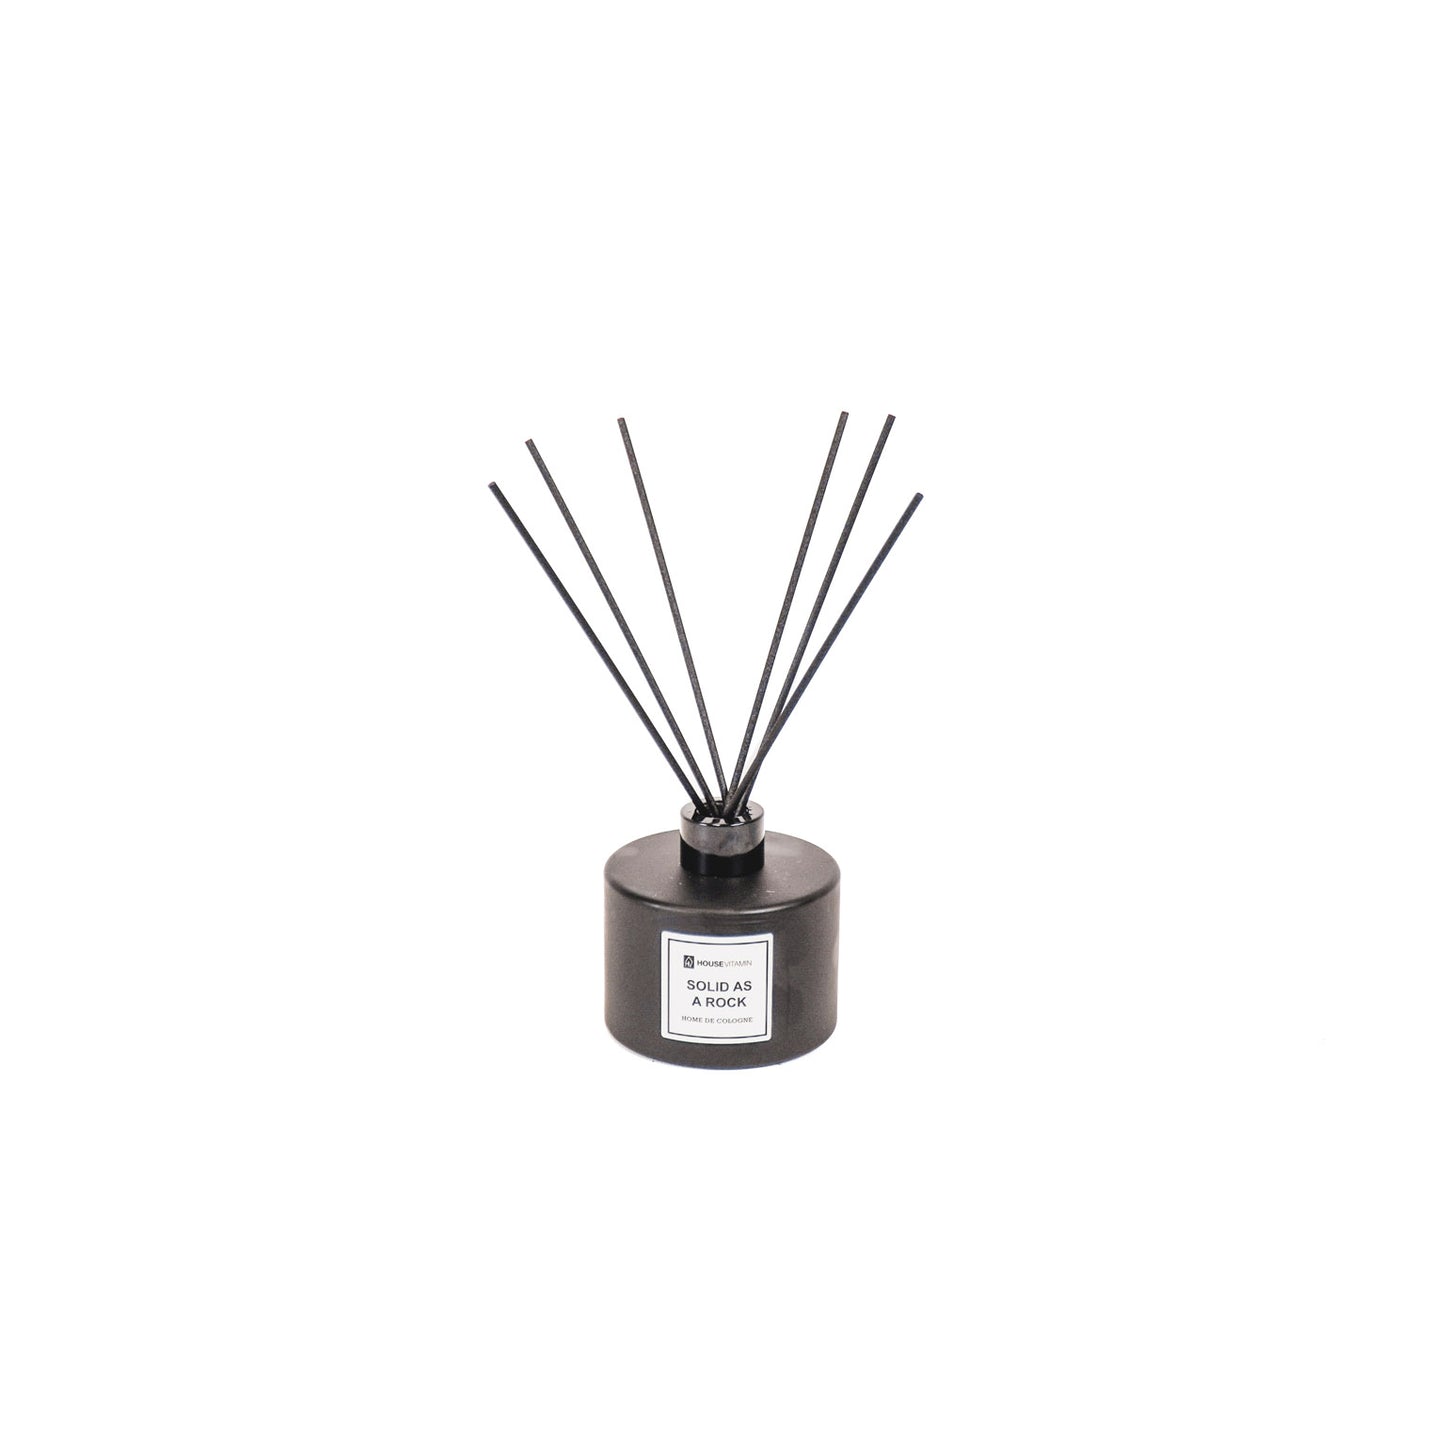 HV Home de Cologne Reed Diffusers - 200 ml - Solid as a rock